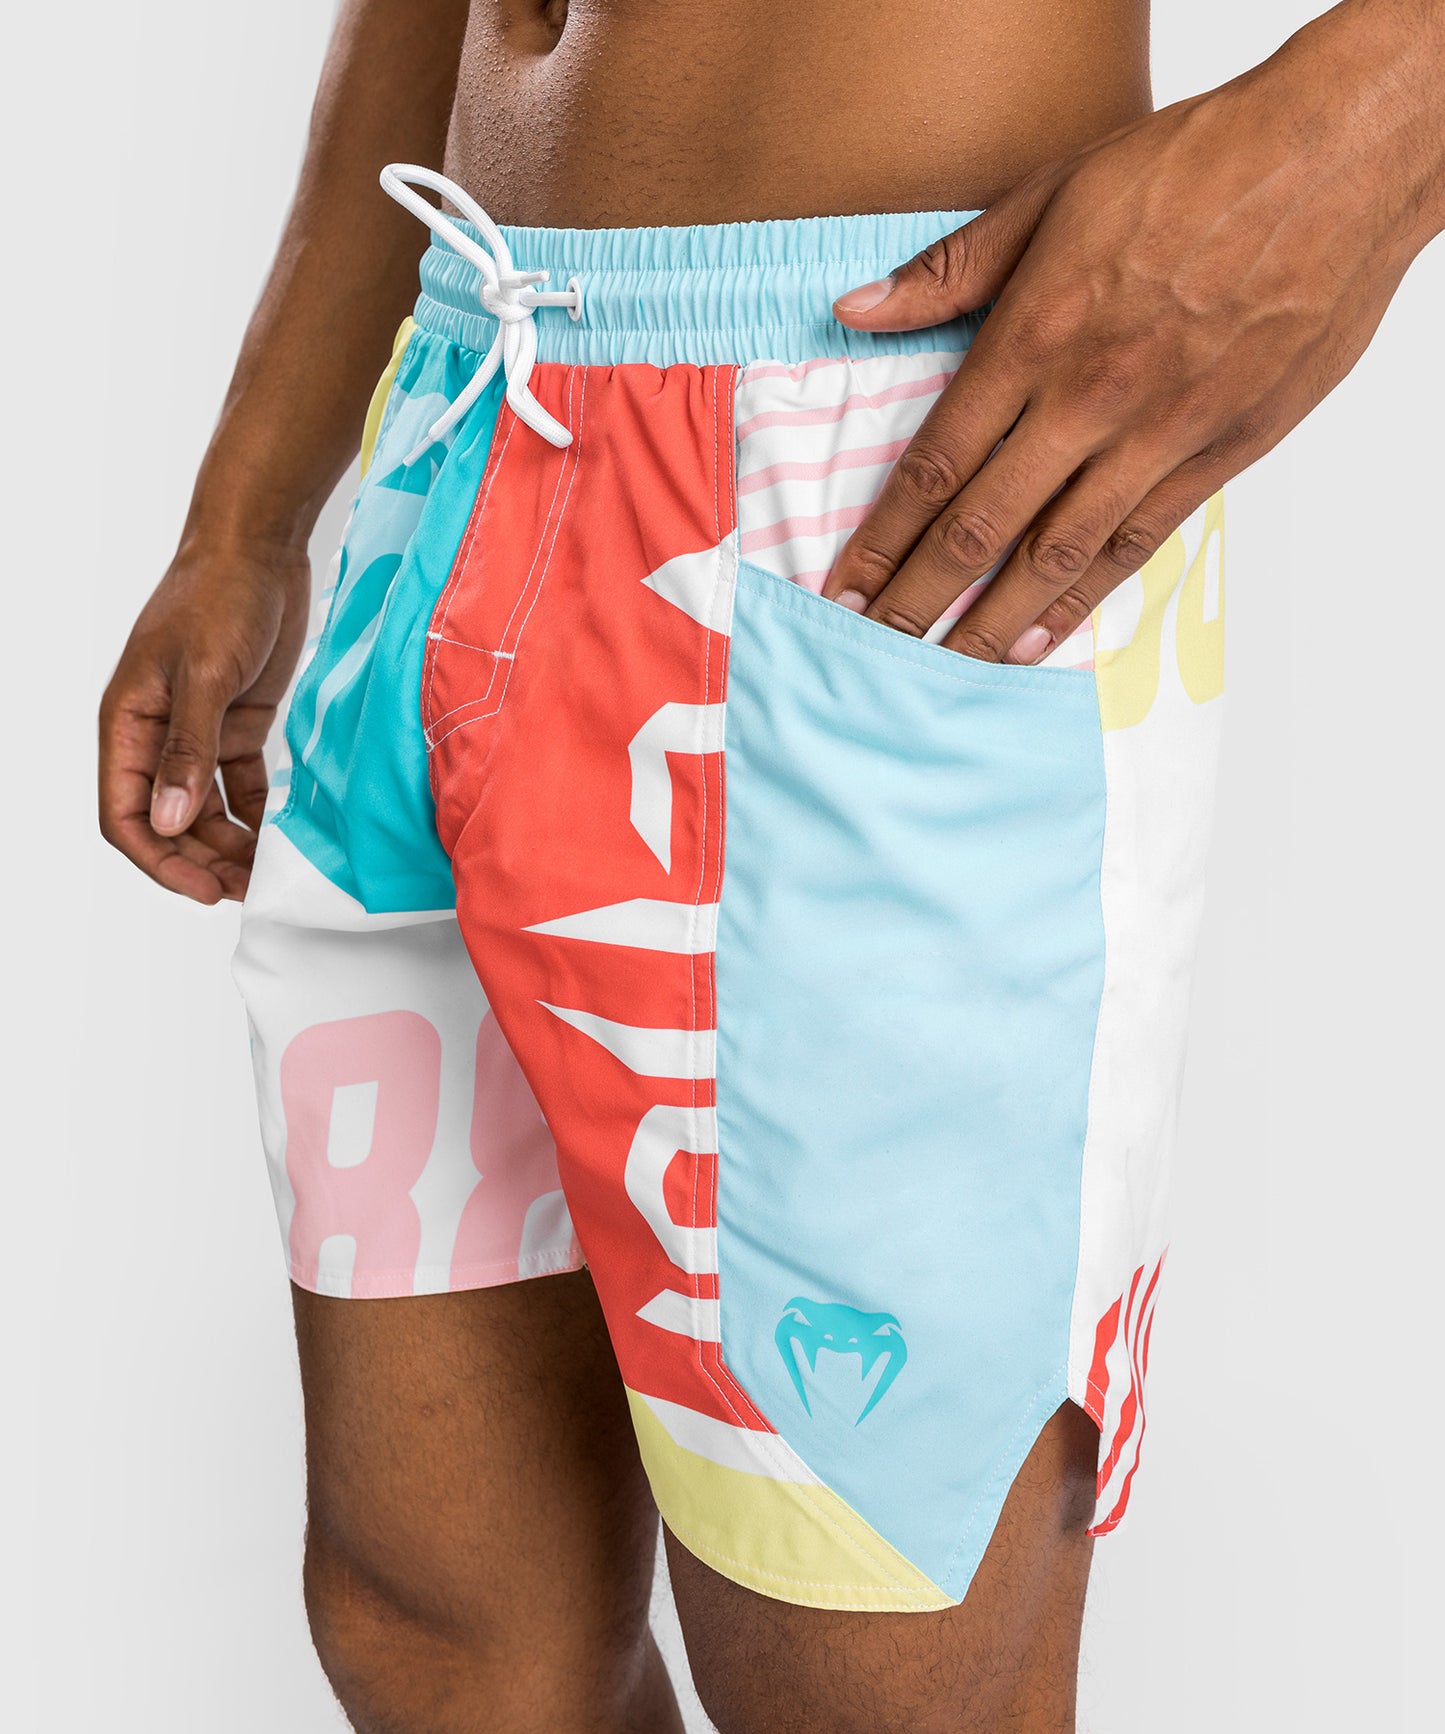 Venum Summer 88 Boardshorts - Clearwater Blue/Flame Red